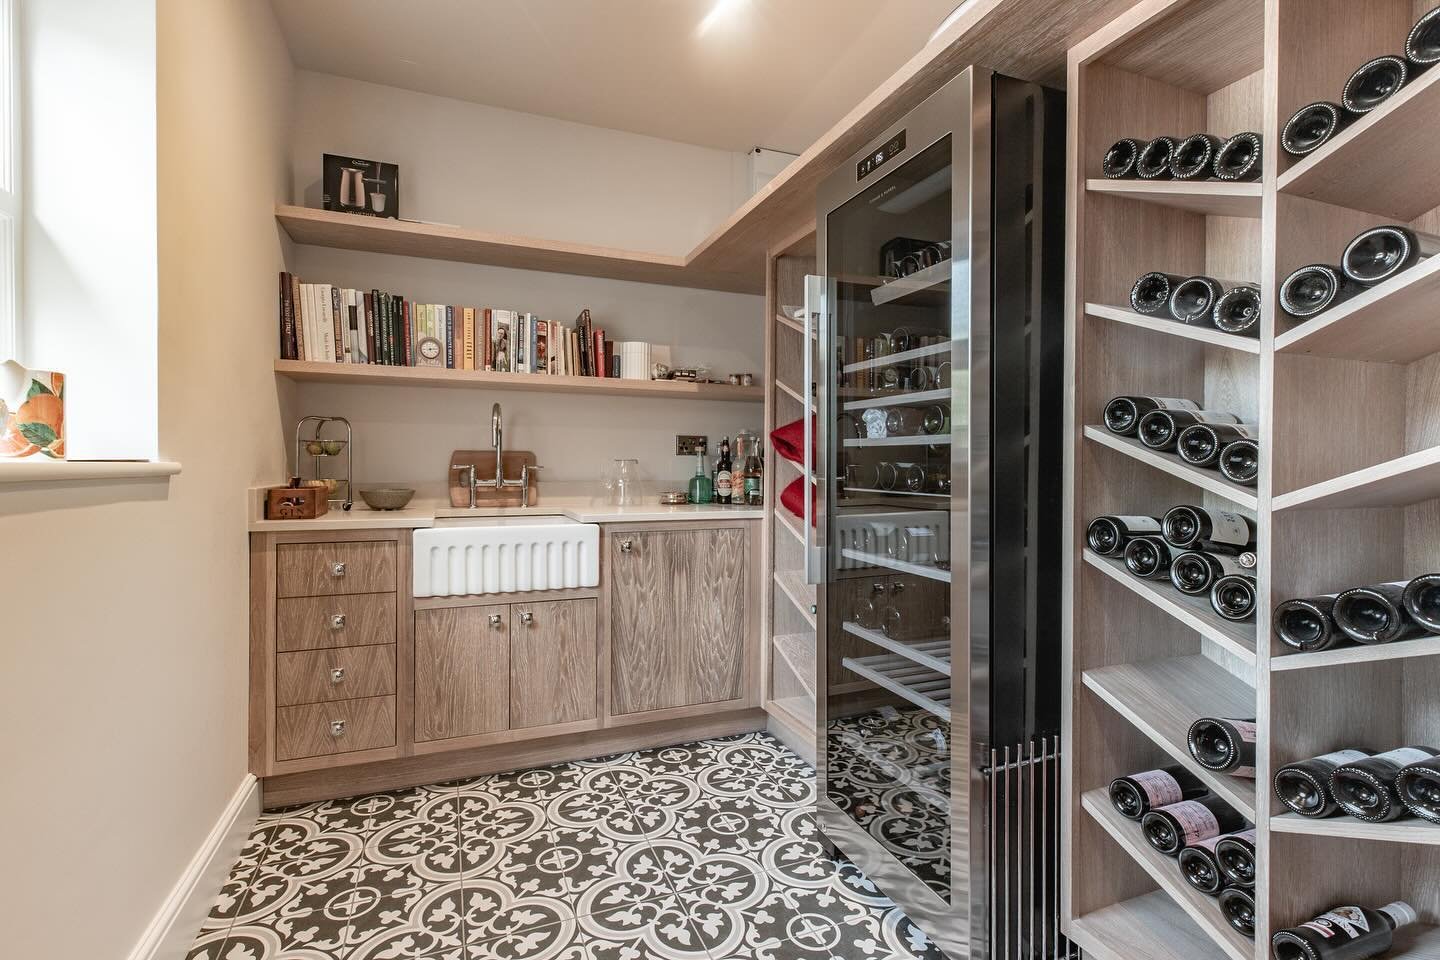 A past project by our workshop, working with the designs created by @hortonandco we manufactured this bespoke bar and wine storage to suit their requirements.

A perfect space to replenish those weekend drinks 🍸 

#bardesign #bespokecabinetry #wined